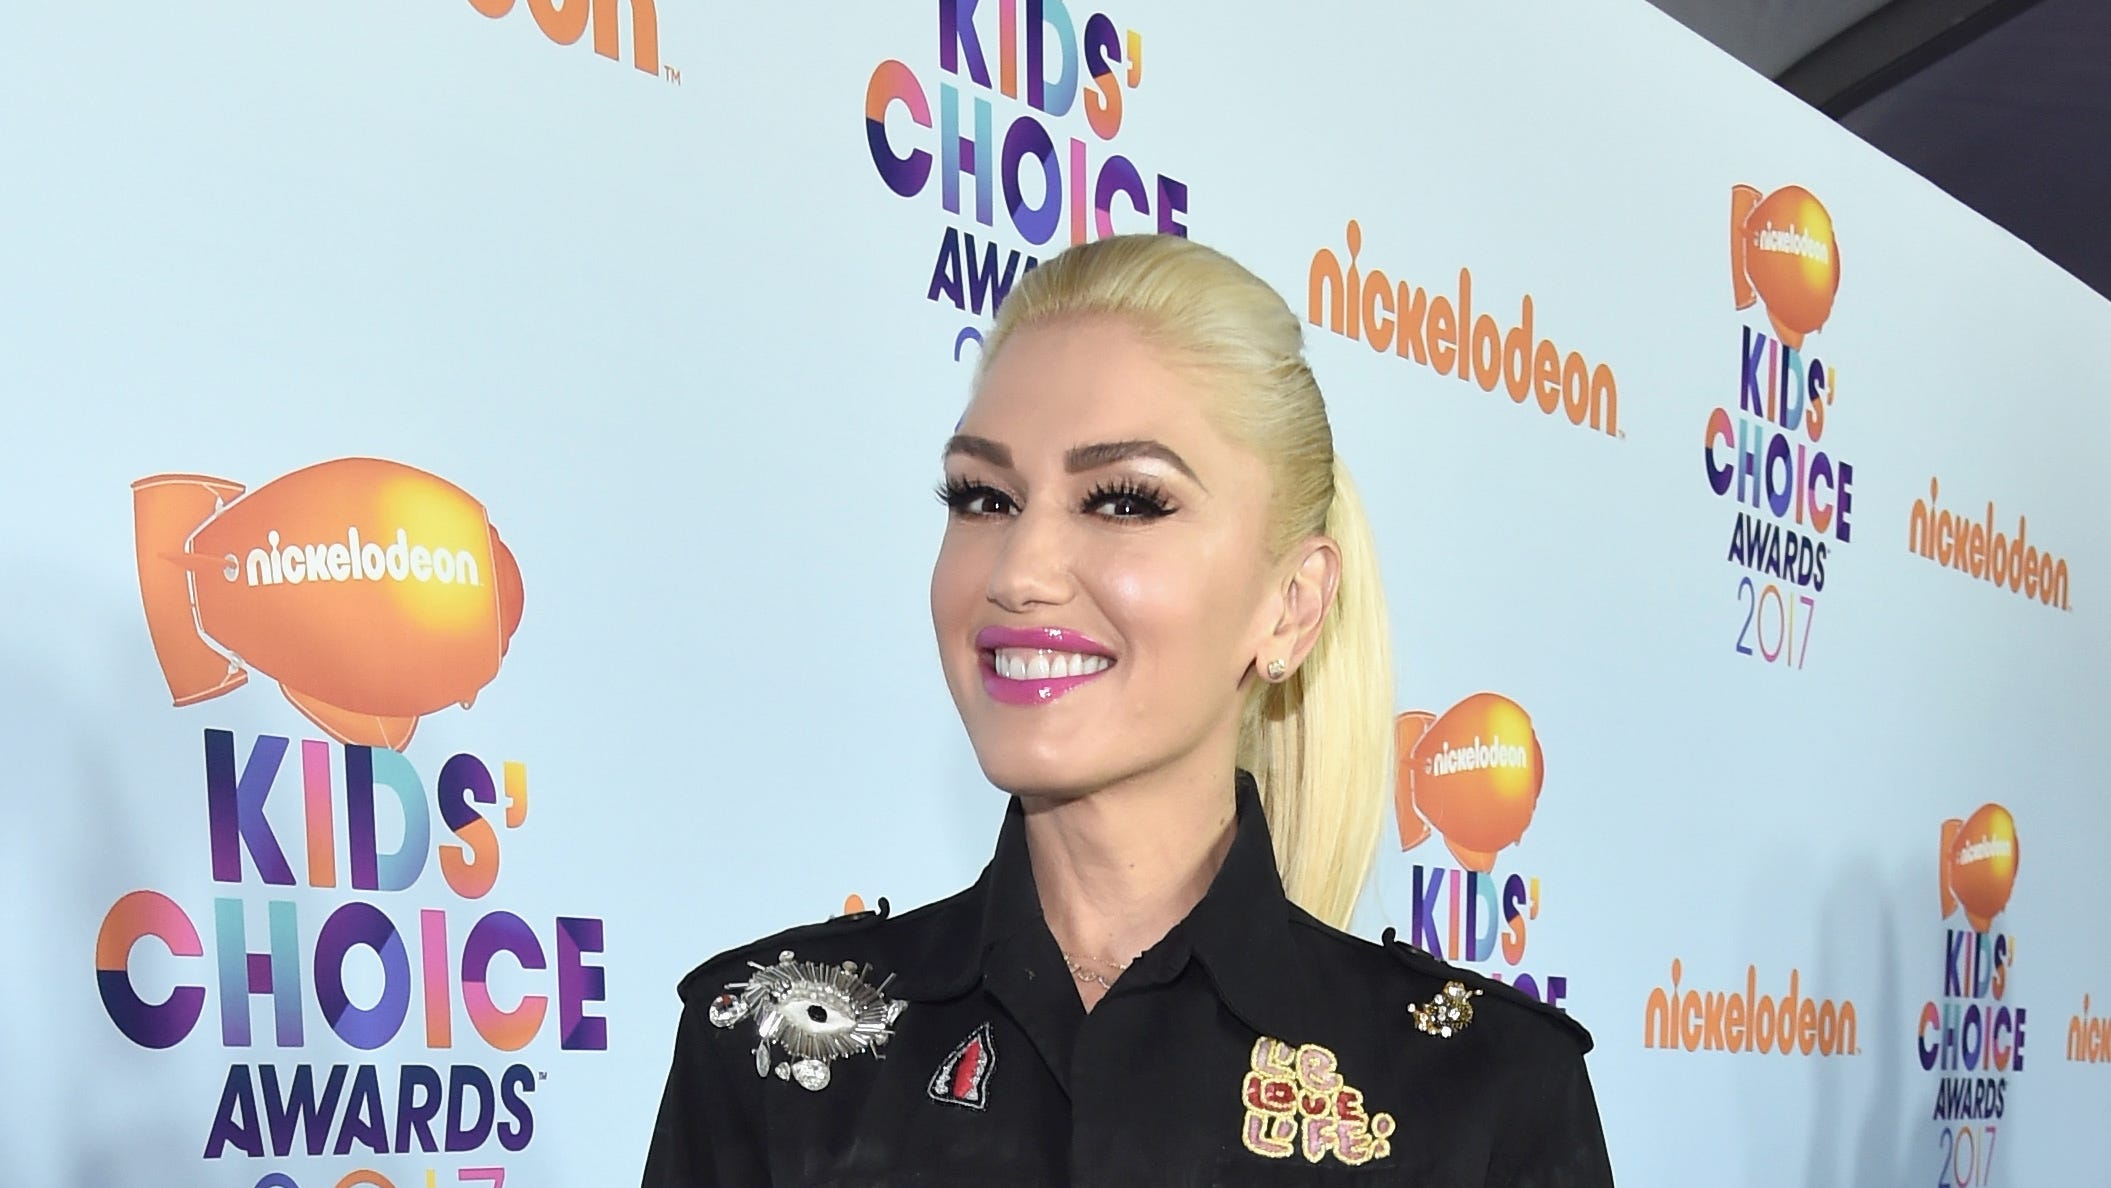 Gwen Stefani draws backlash for saying 'I'm Japanese' in response to cultural appropriation charges